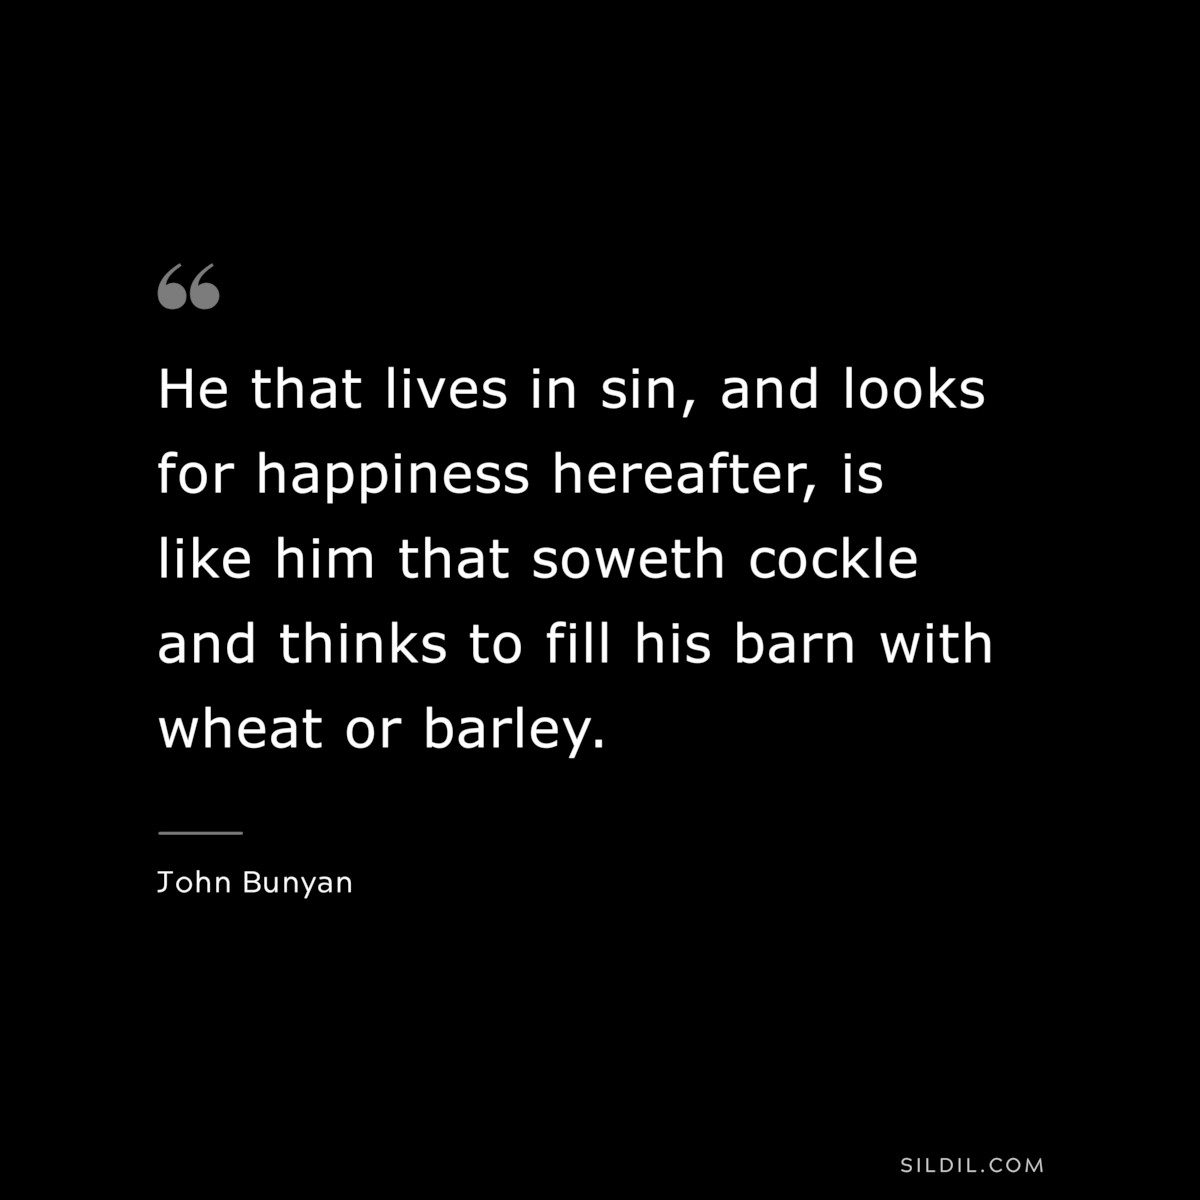 He that lives in sin, and looks for happiness hereafter, is like him that soweth cockle and thinks to fill his barn with wheat or barley. ― John Bunyan